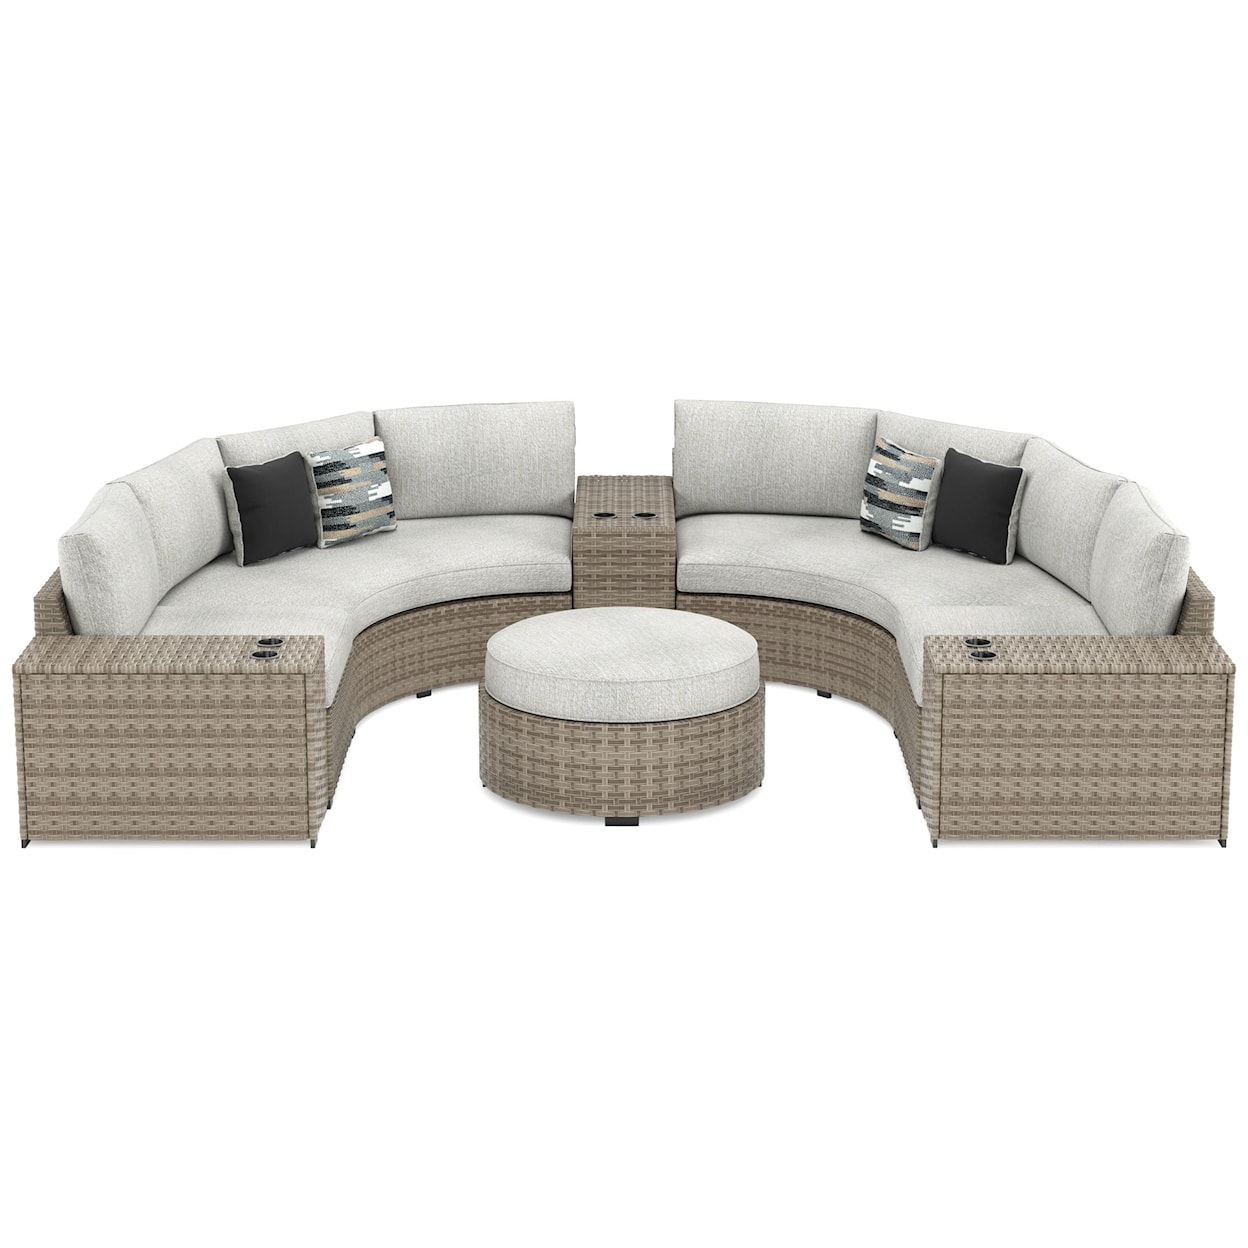 Signature Design by Ashley Calworth Outdoor 7-Piece Sectional